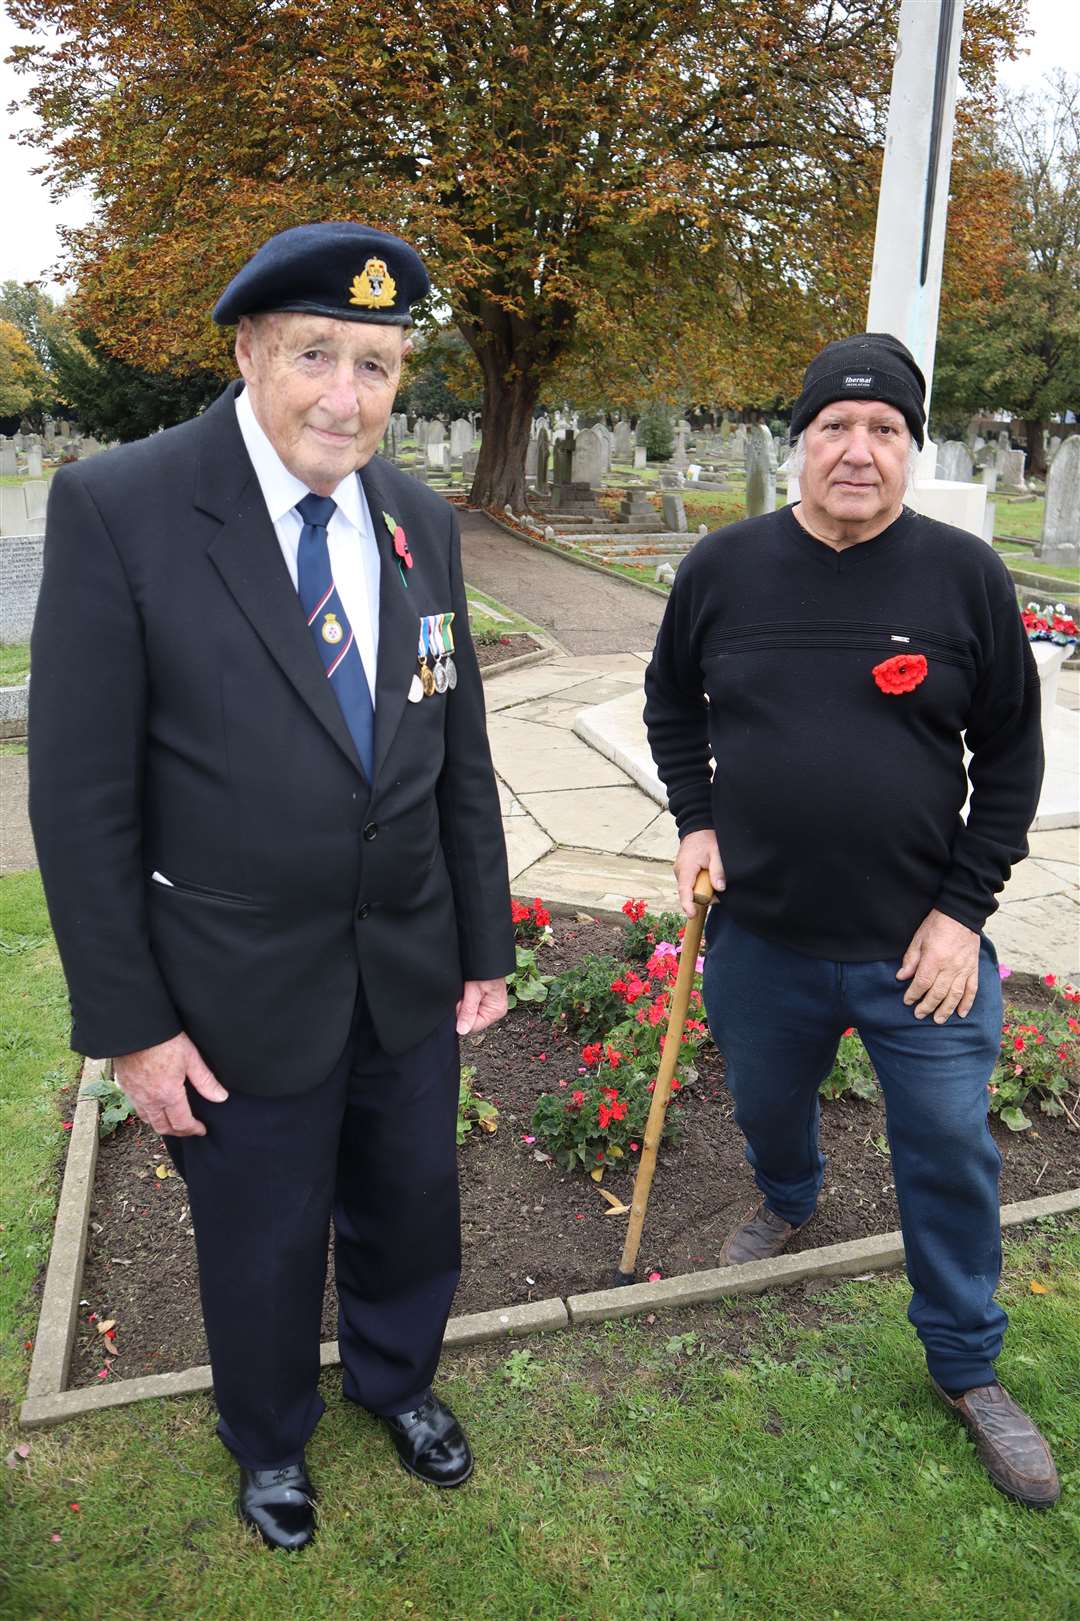 Cllr Peter MacDonald and Malcolm Newell replanted the four flower beds around the war memorial in Halfway cemetery in readiness for the Remembrance Day service